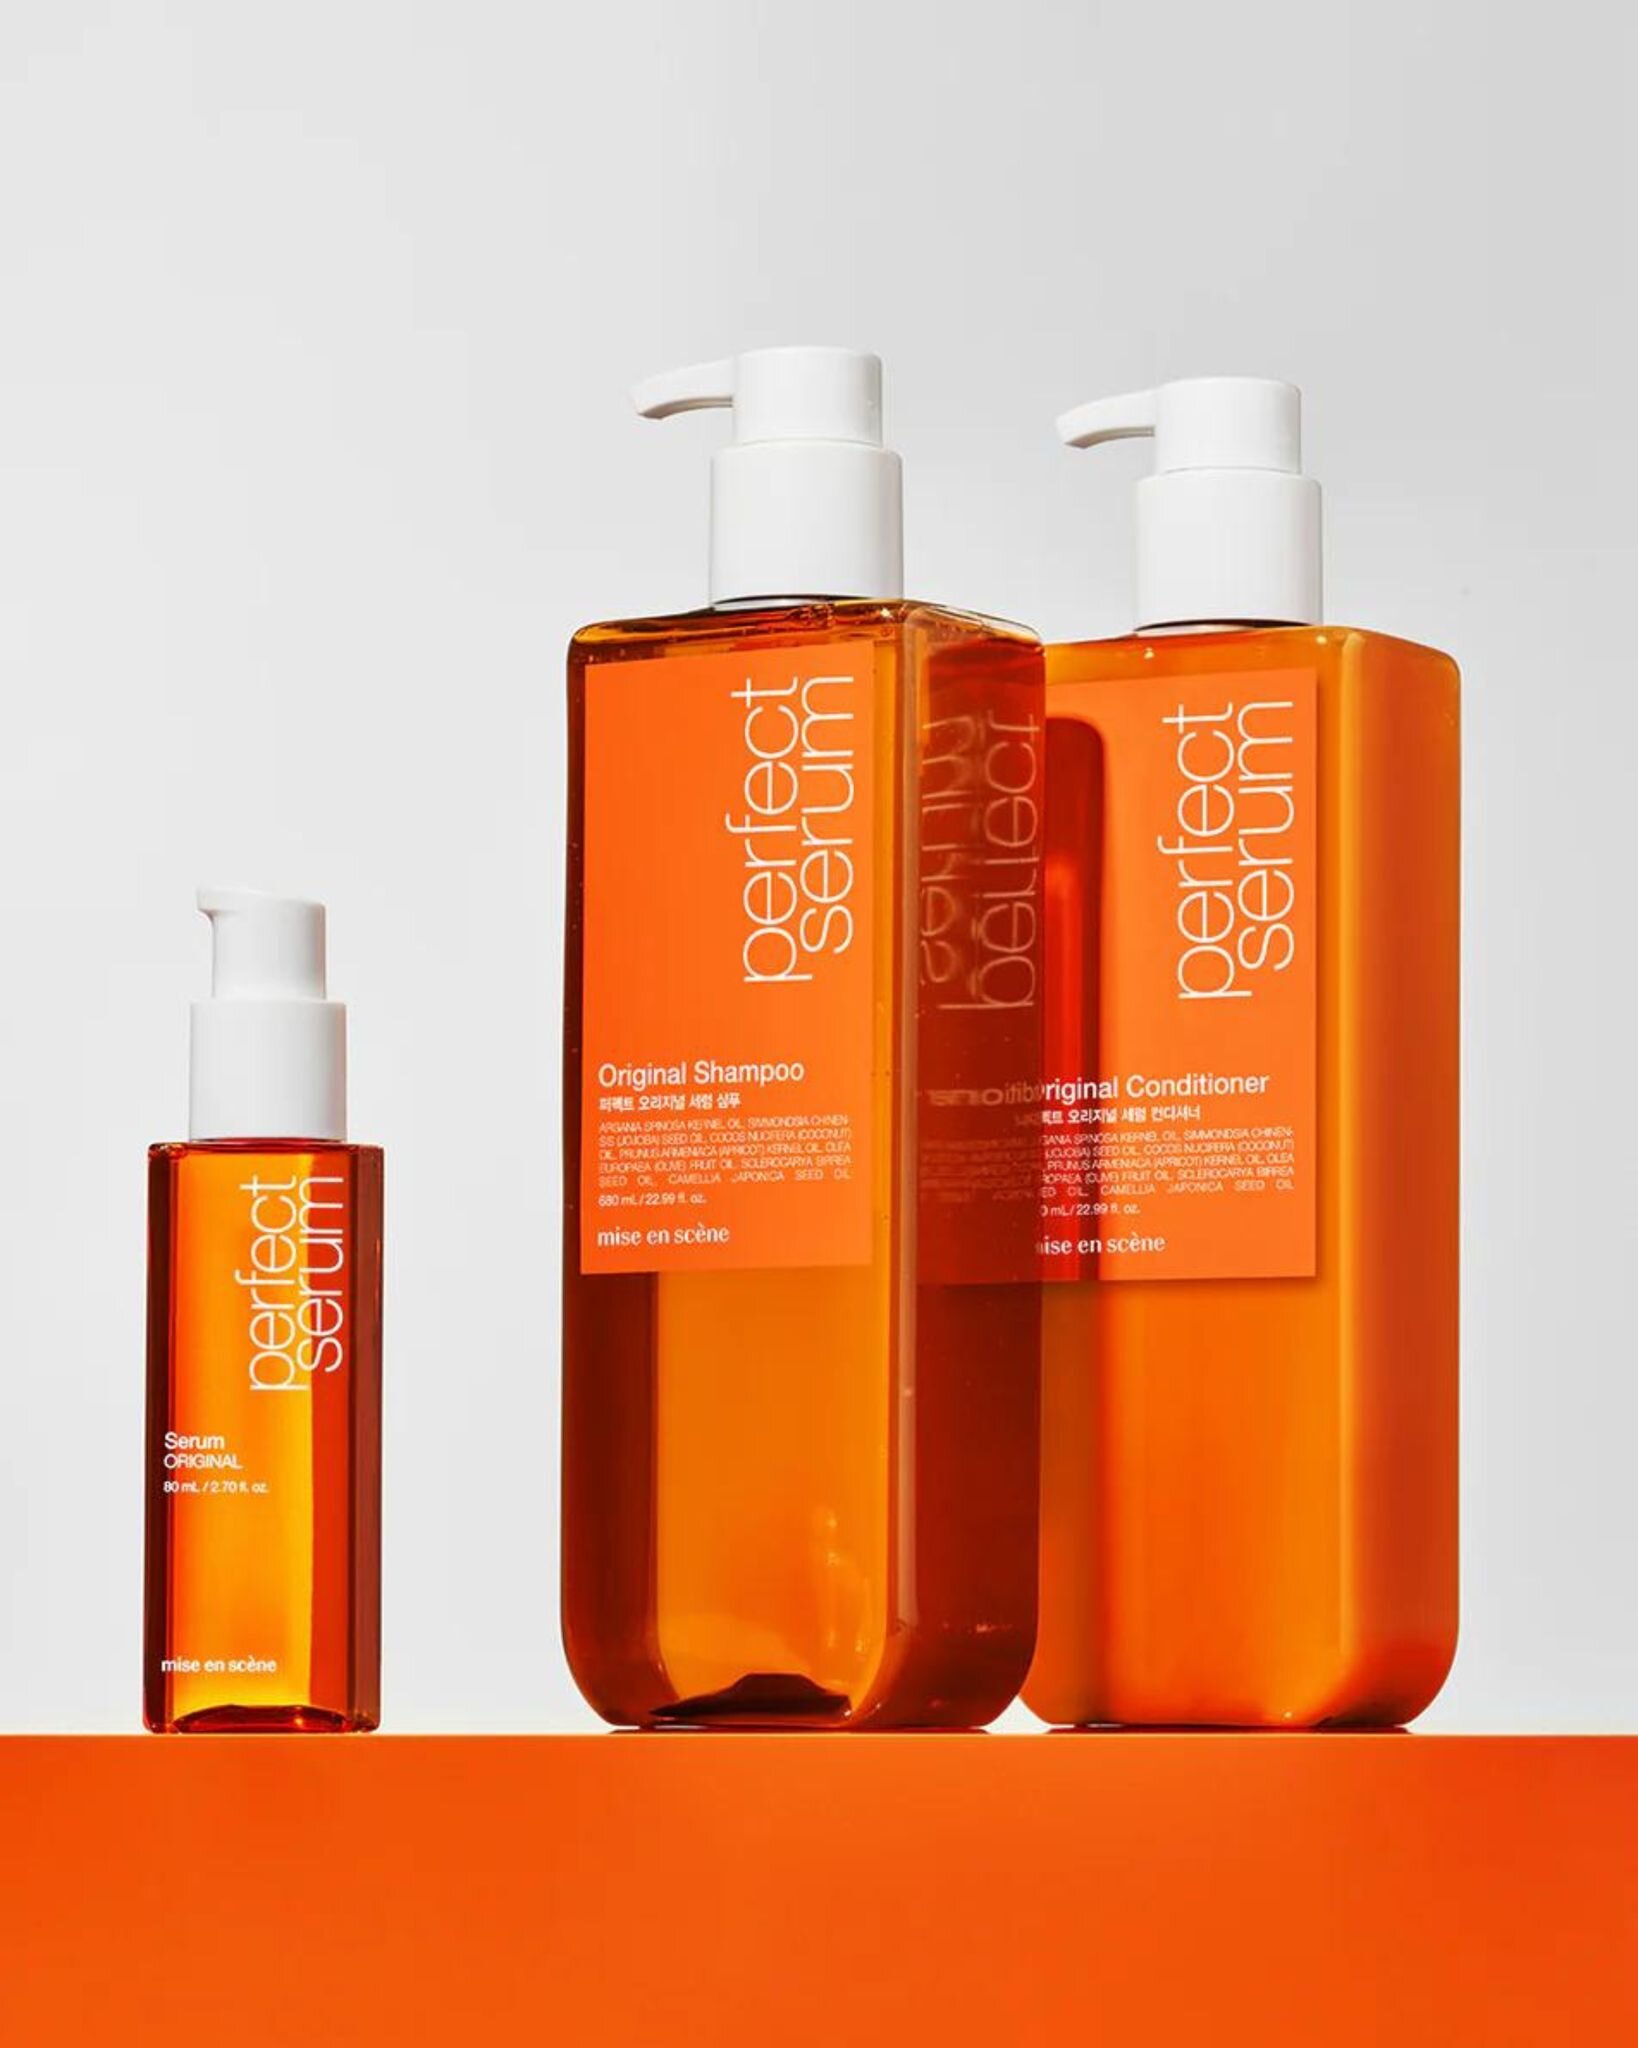 Self-care include hair care! Achieve a healthier and more radiant look with Mise En Scene's Perfect Original Serum Shampoo &amp; Hair Serum which are formulated to provide intensive damage repair, revive dry and weak hair, increase hair&rsquo;s elast